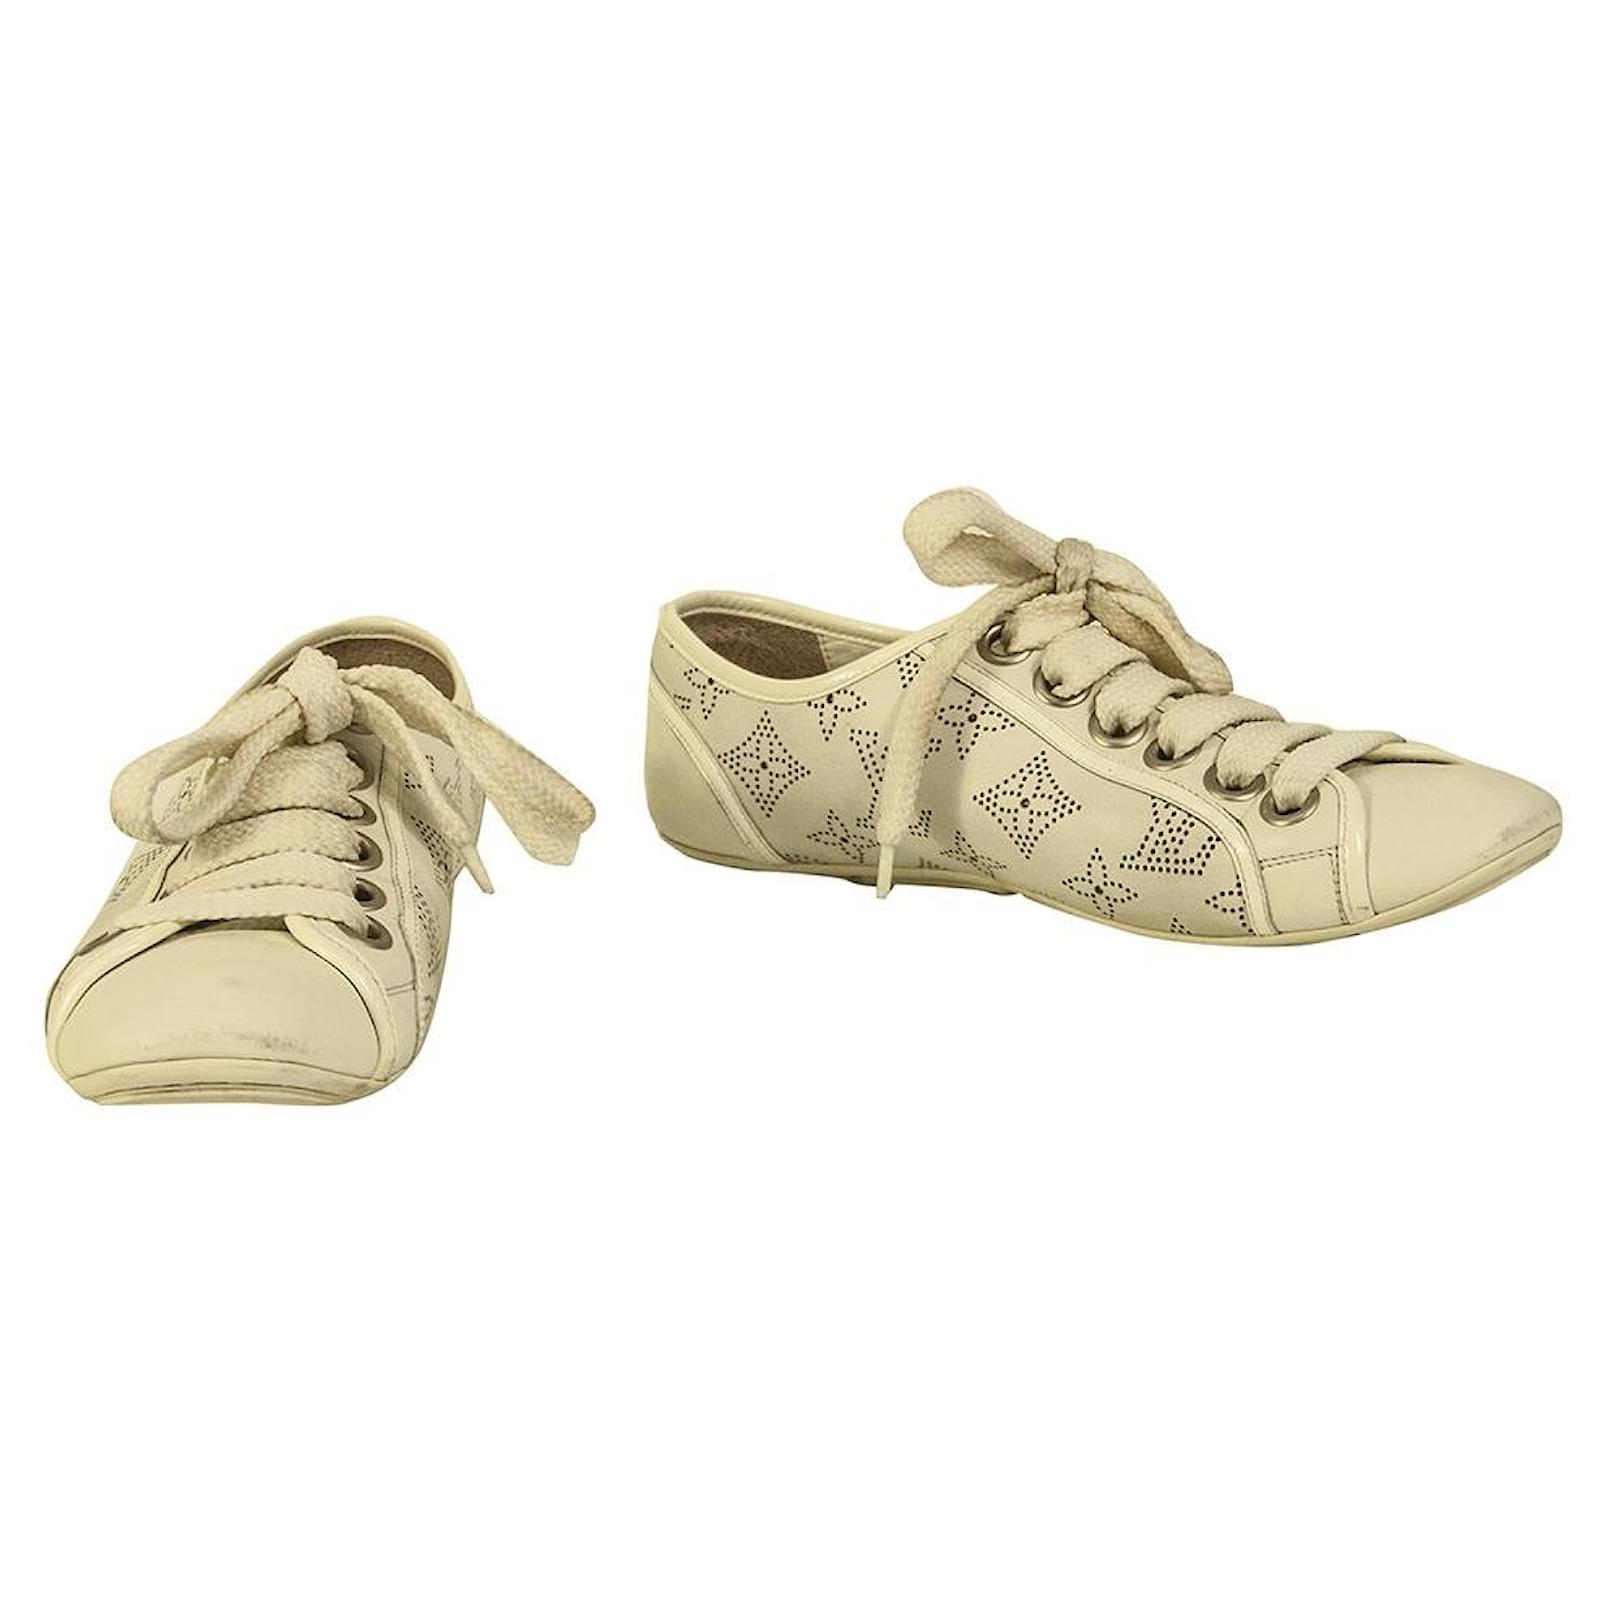 Run away leather trainers Louis Vuitton White size 36.5 EU in